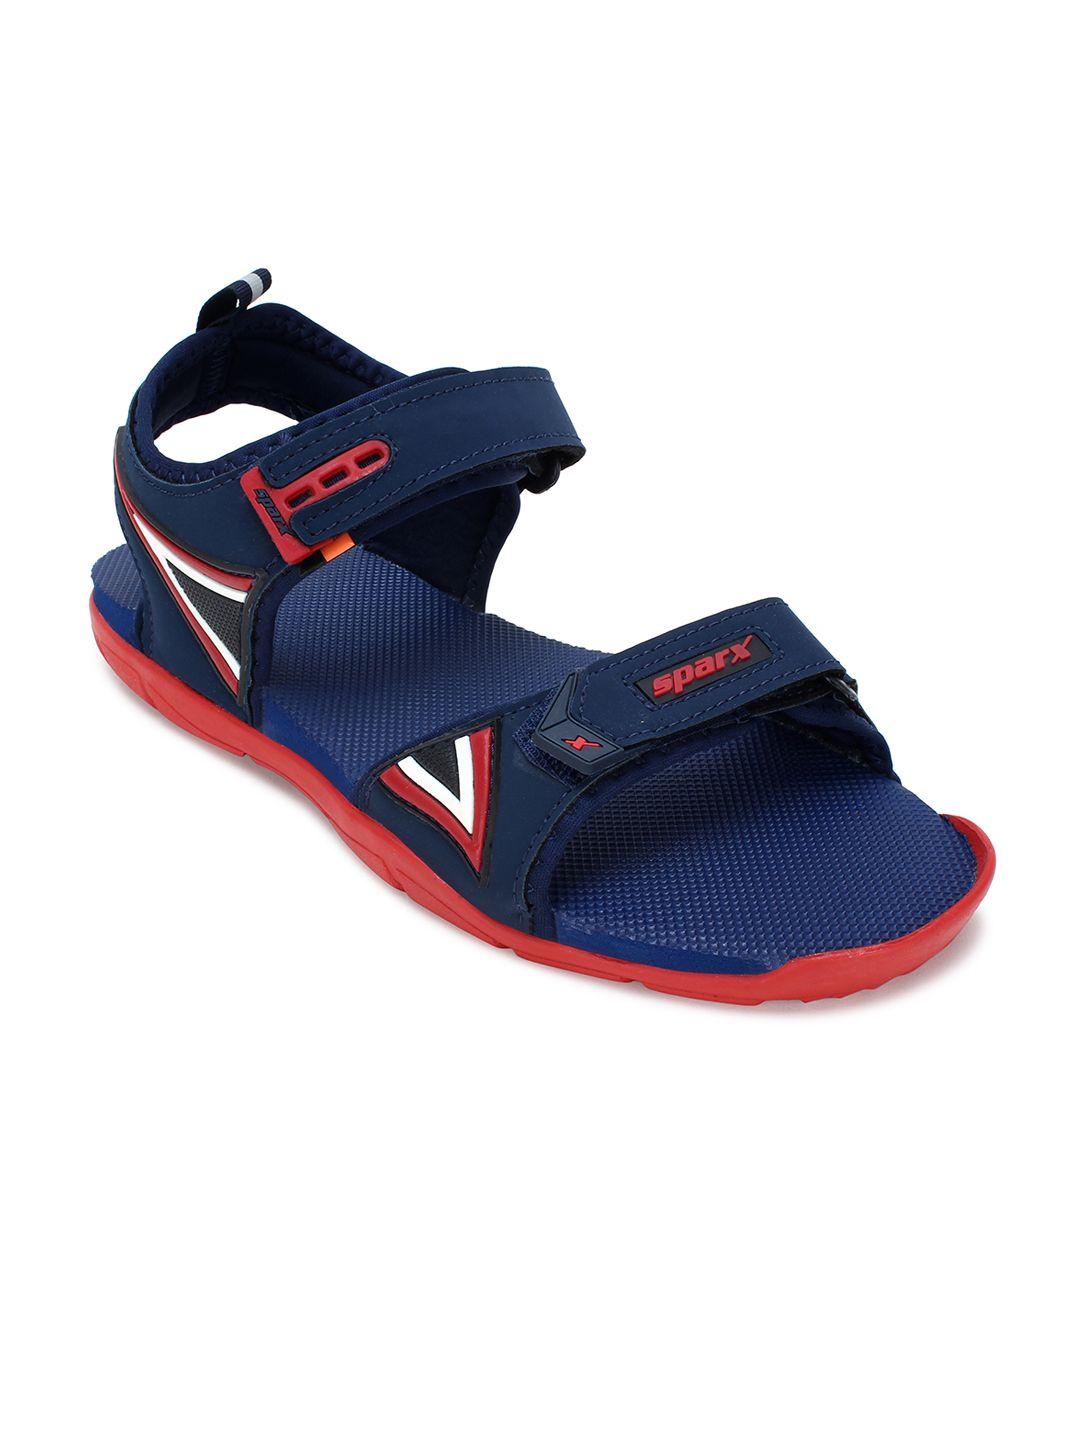 sparx men navy blue and red sports sandals